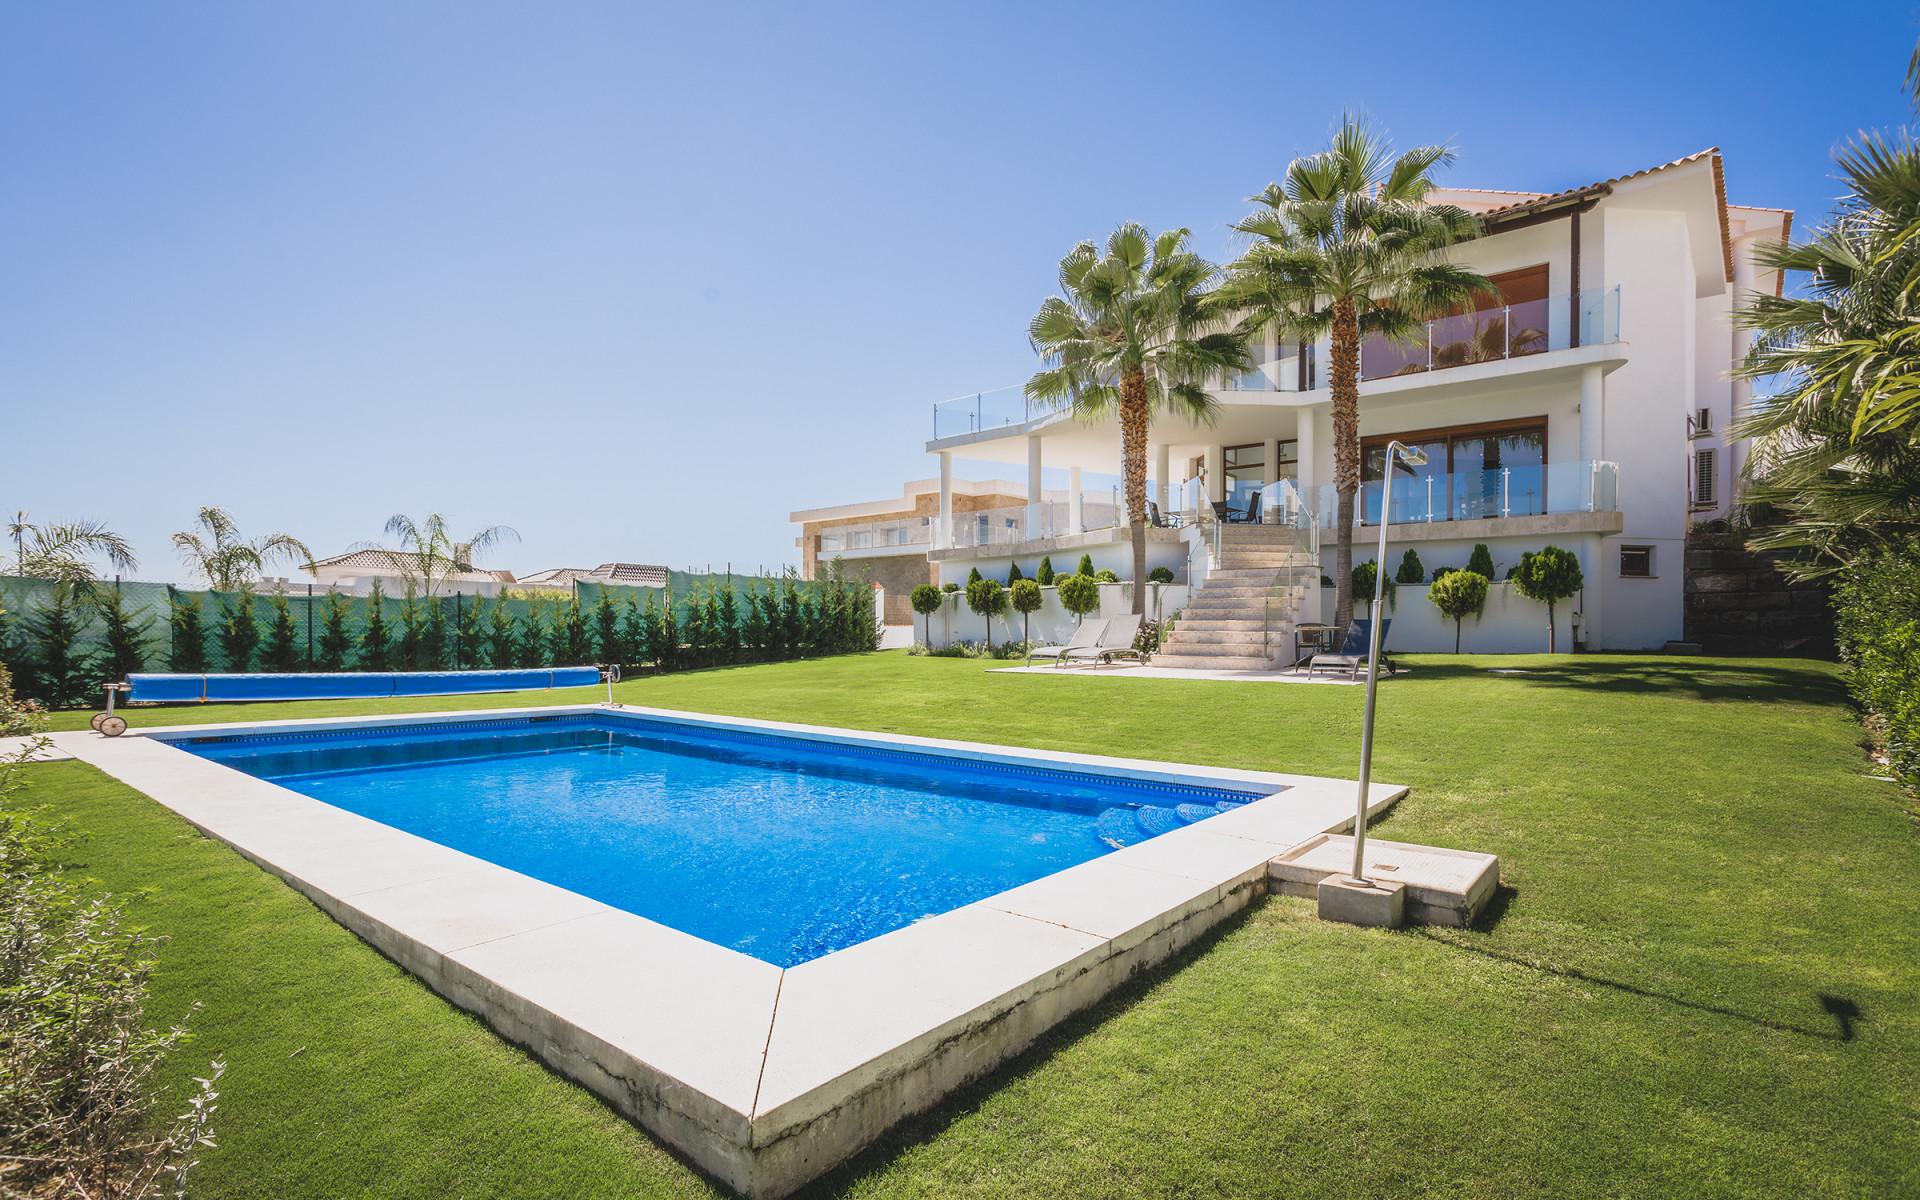 Located in one of the Costa del Sol's most desirable gated communities Los Fl...